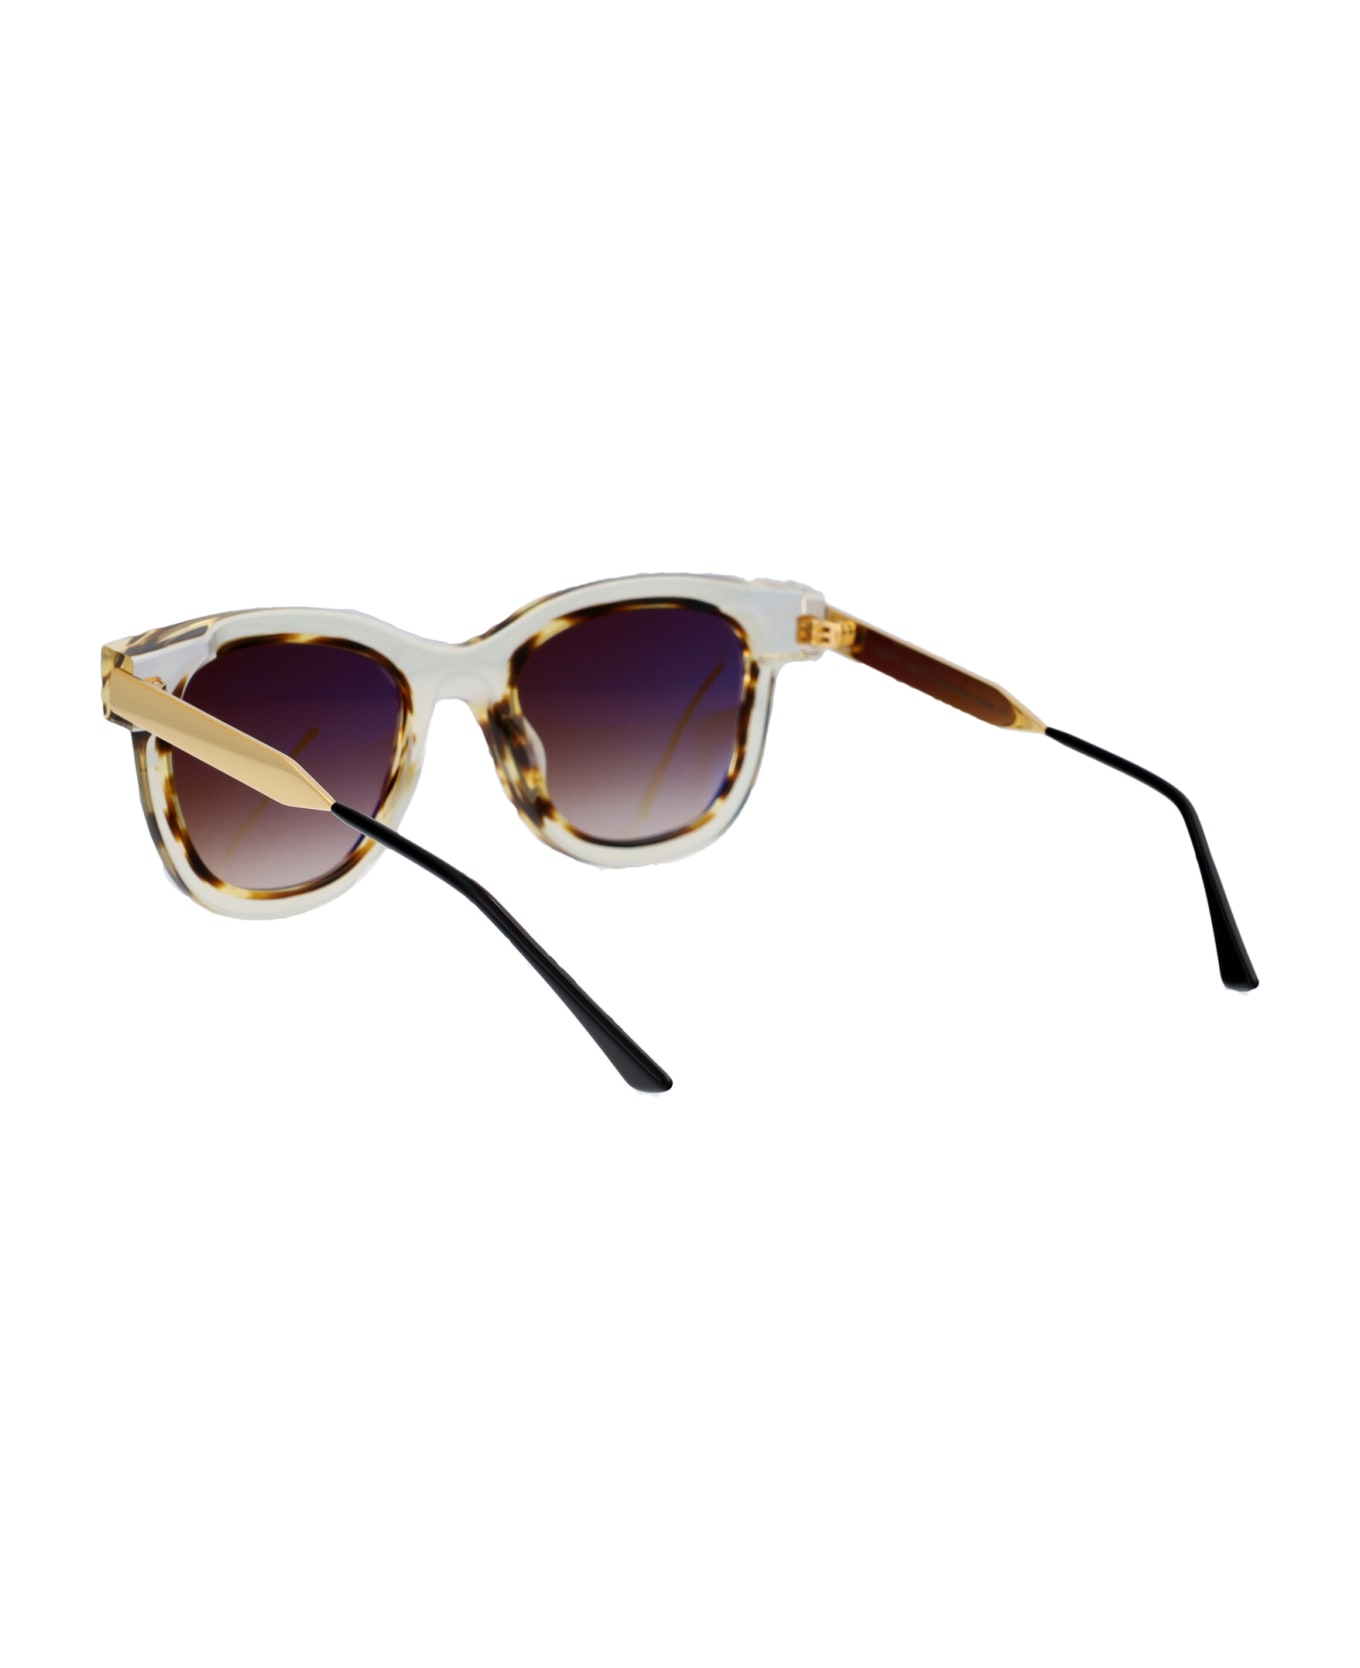 Thierry Lasry Savvvy Sunglasses - 995 GOLD